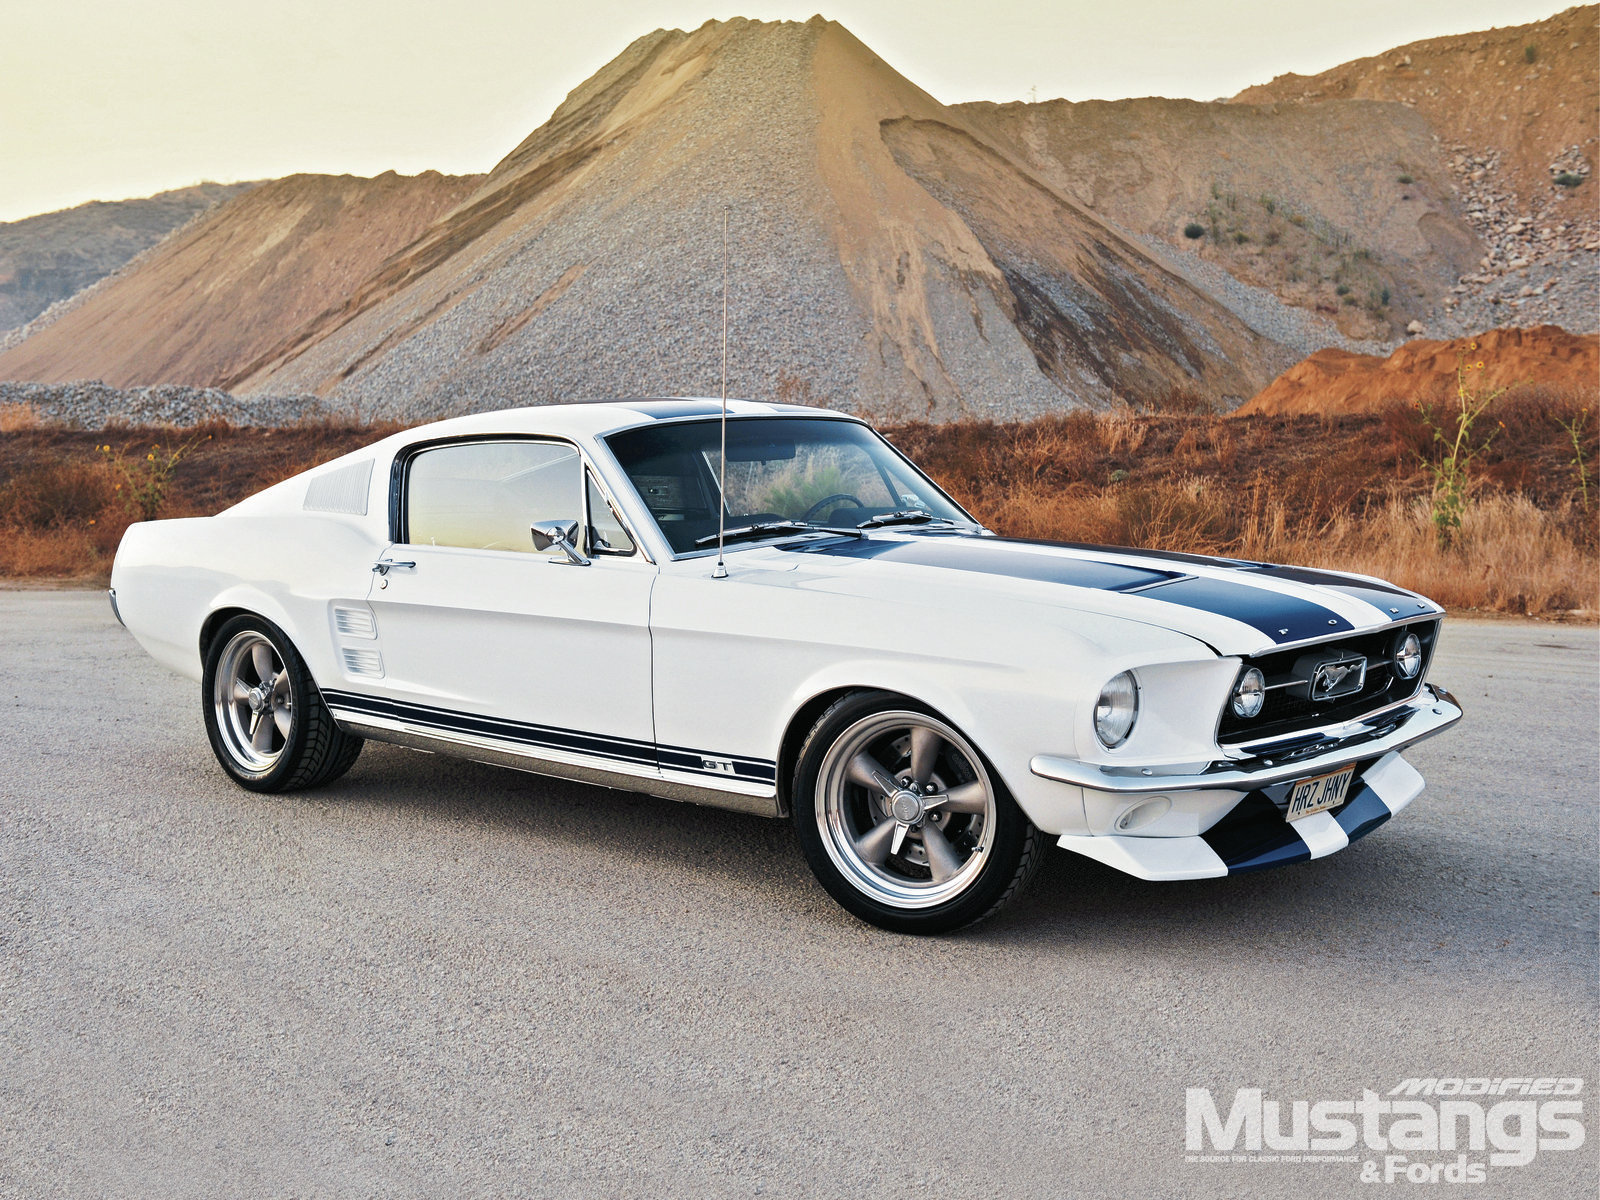 mdmp-1205-001-1967-mustang-fastback-a-golden-opportunity-